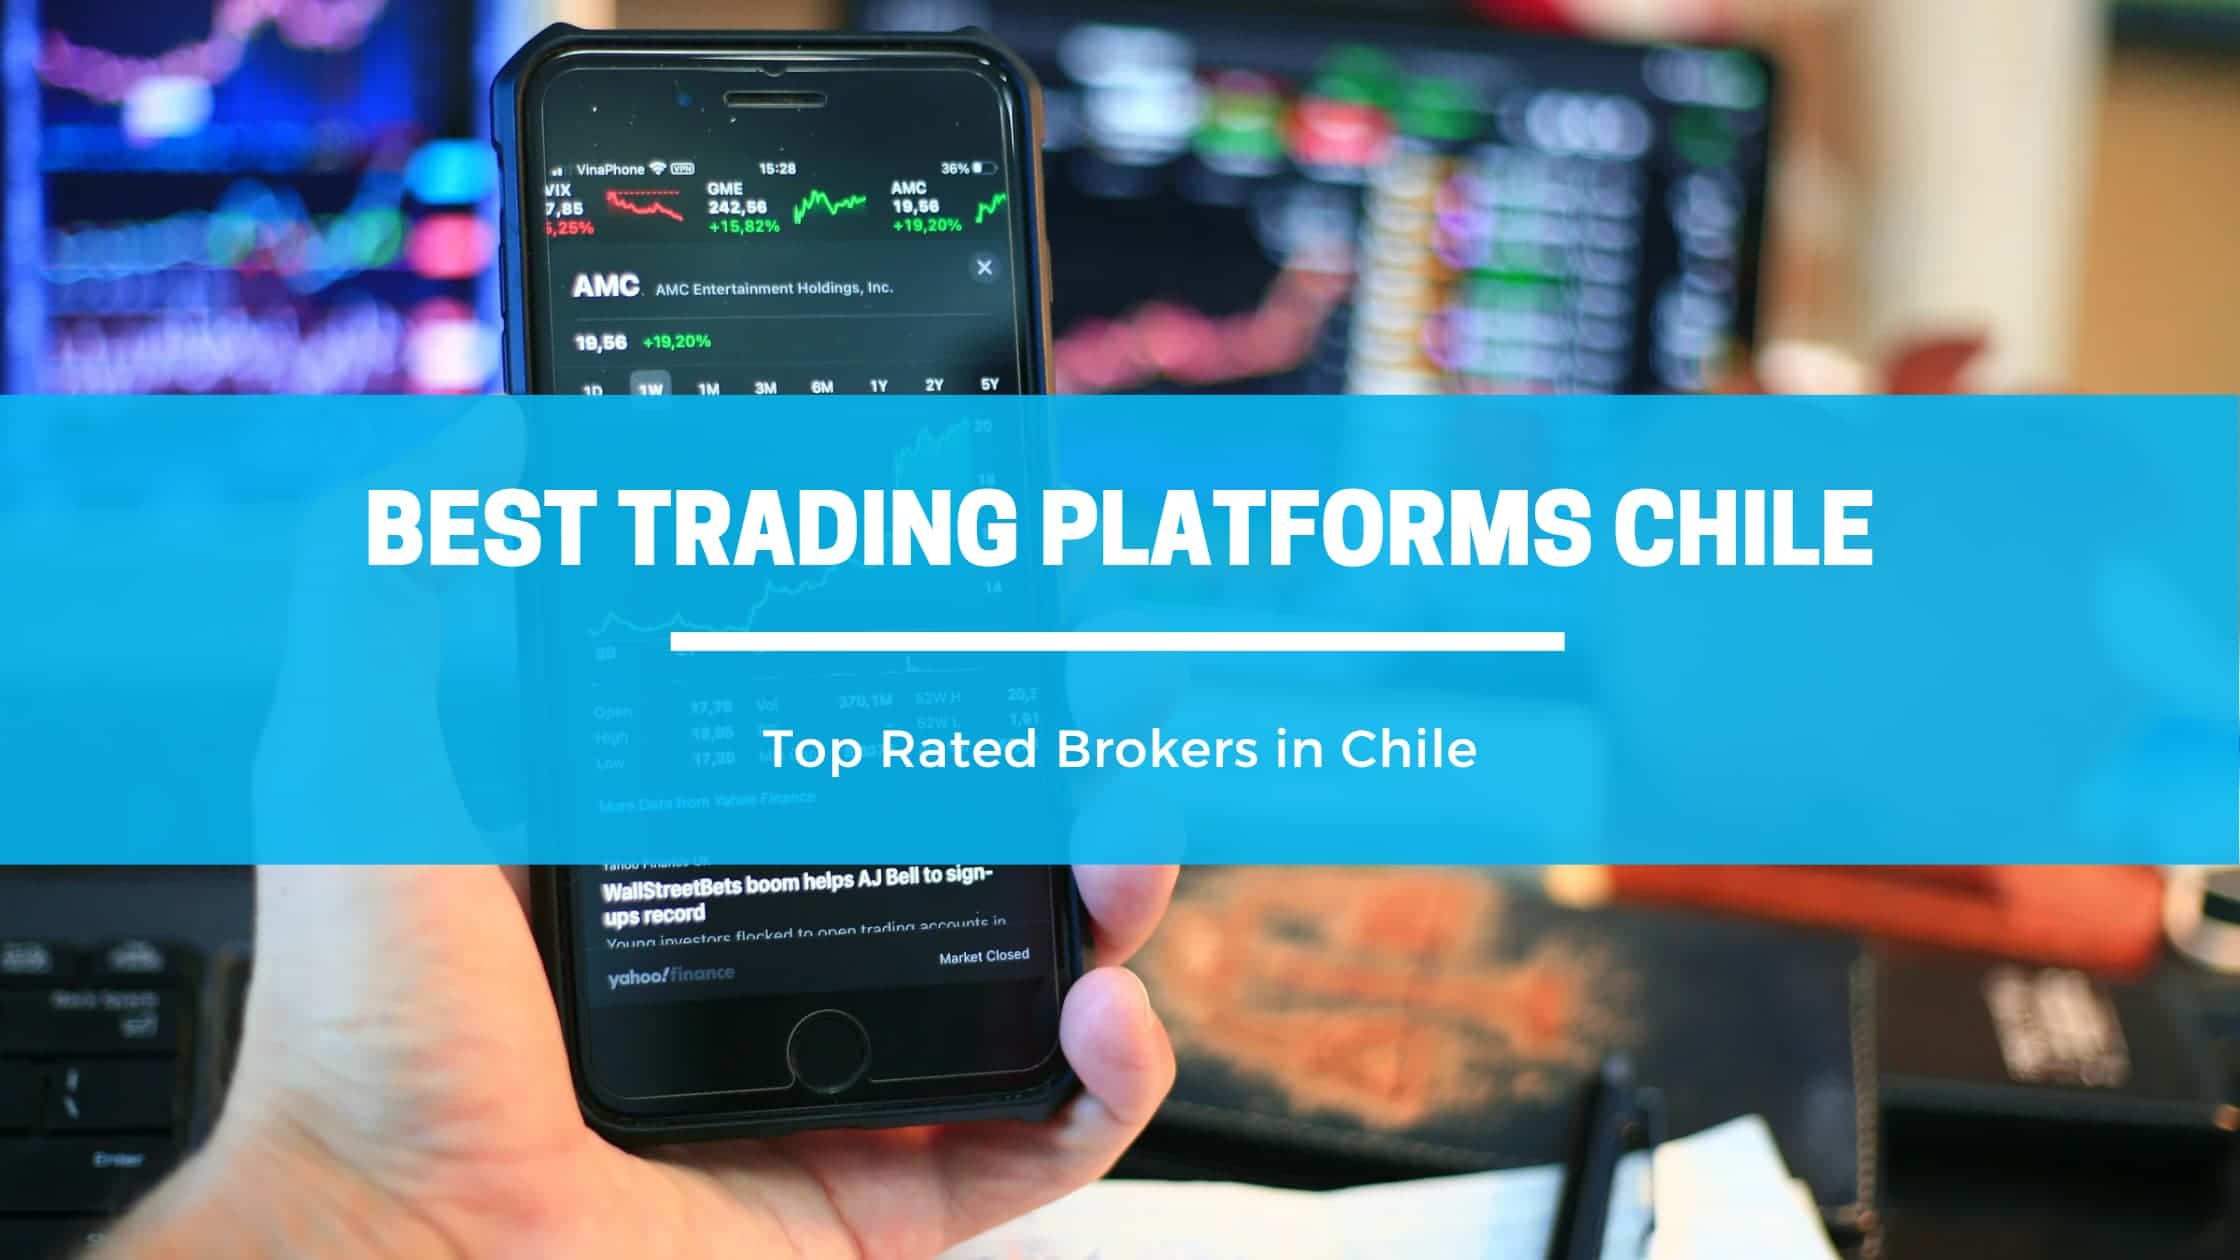 Online Brokers in Chile